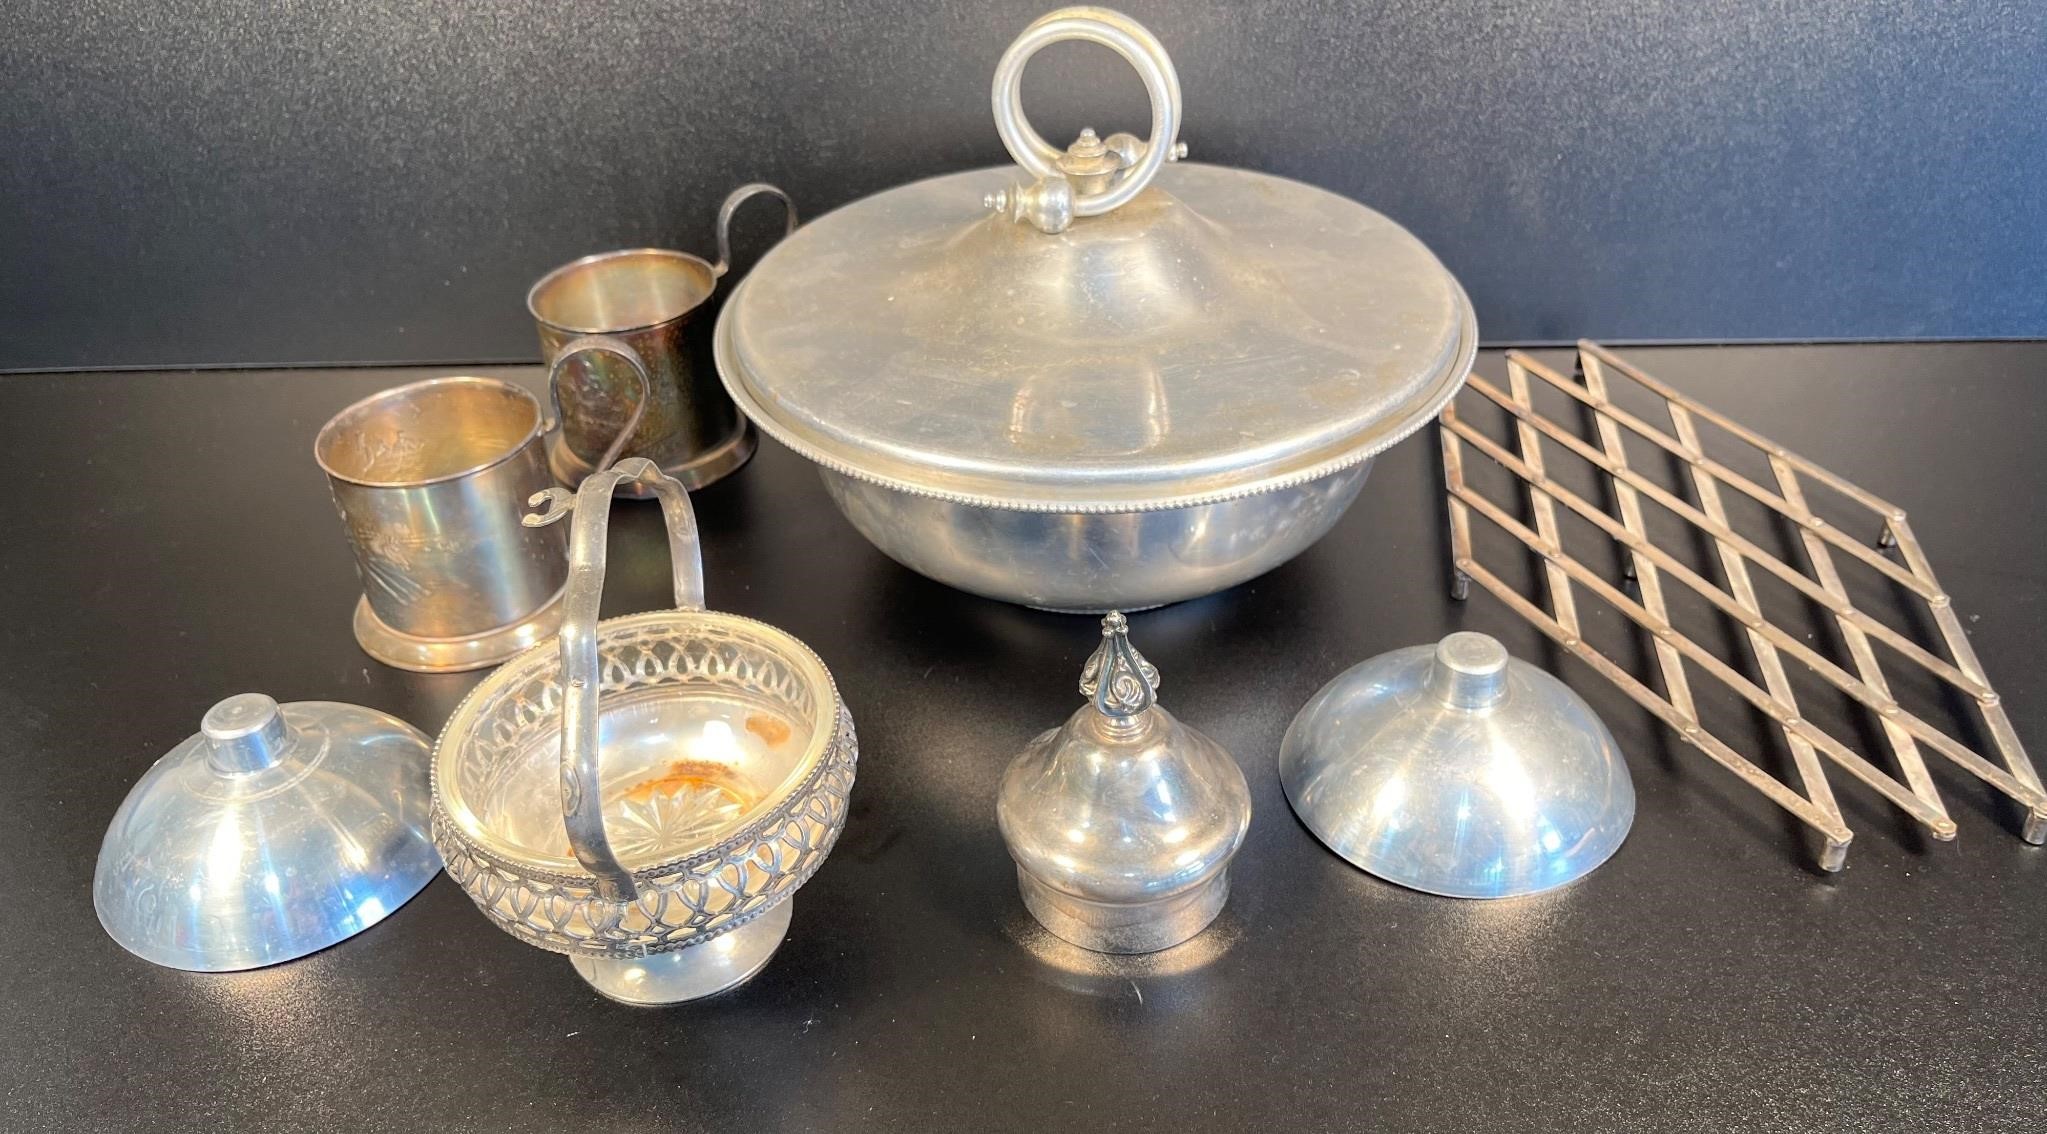 Collection of Aluminum & Plated Serving Ware